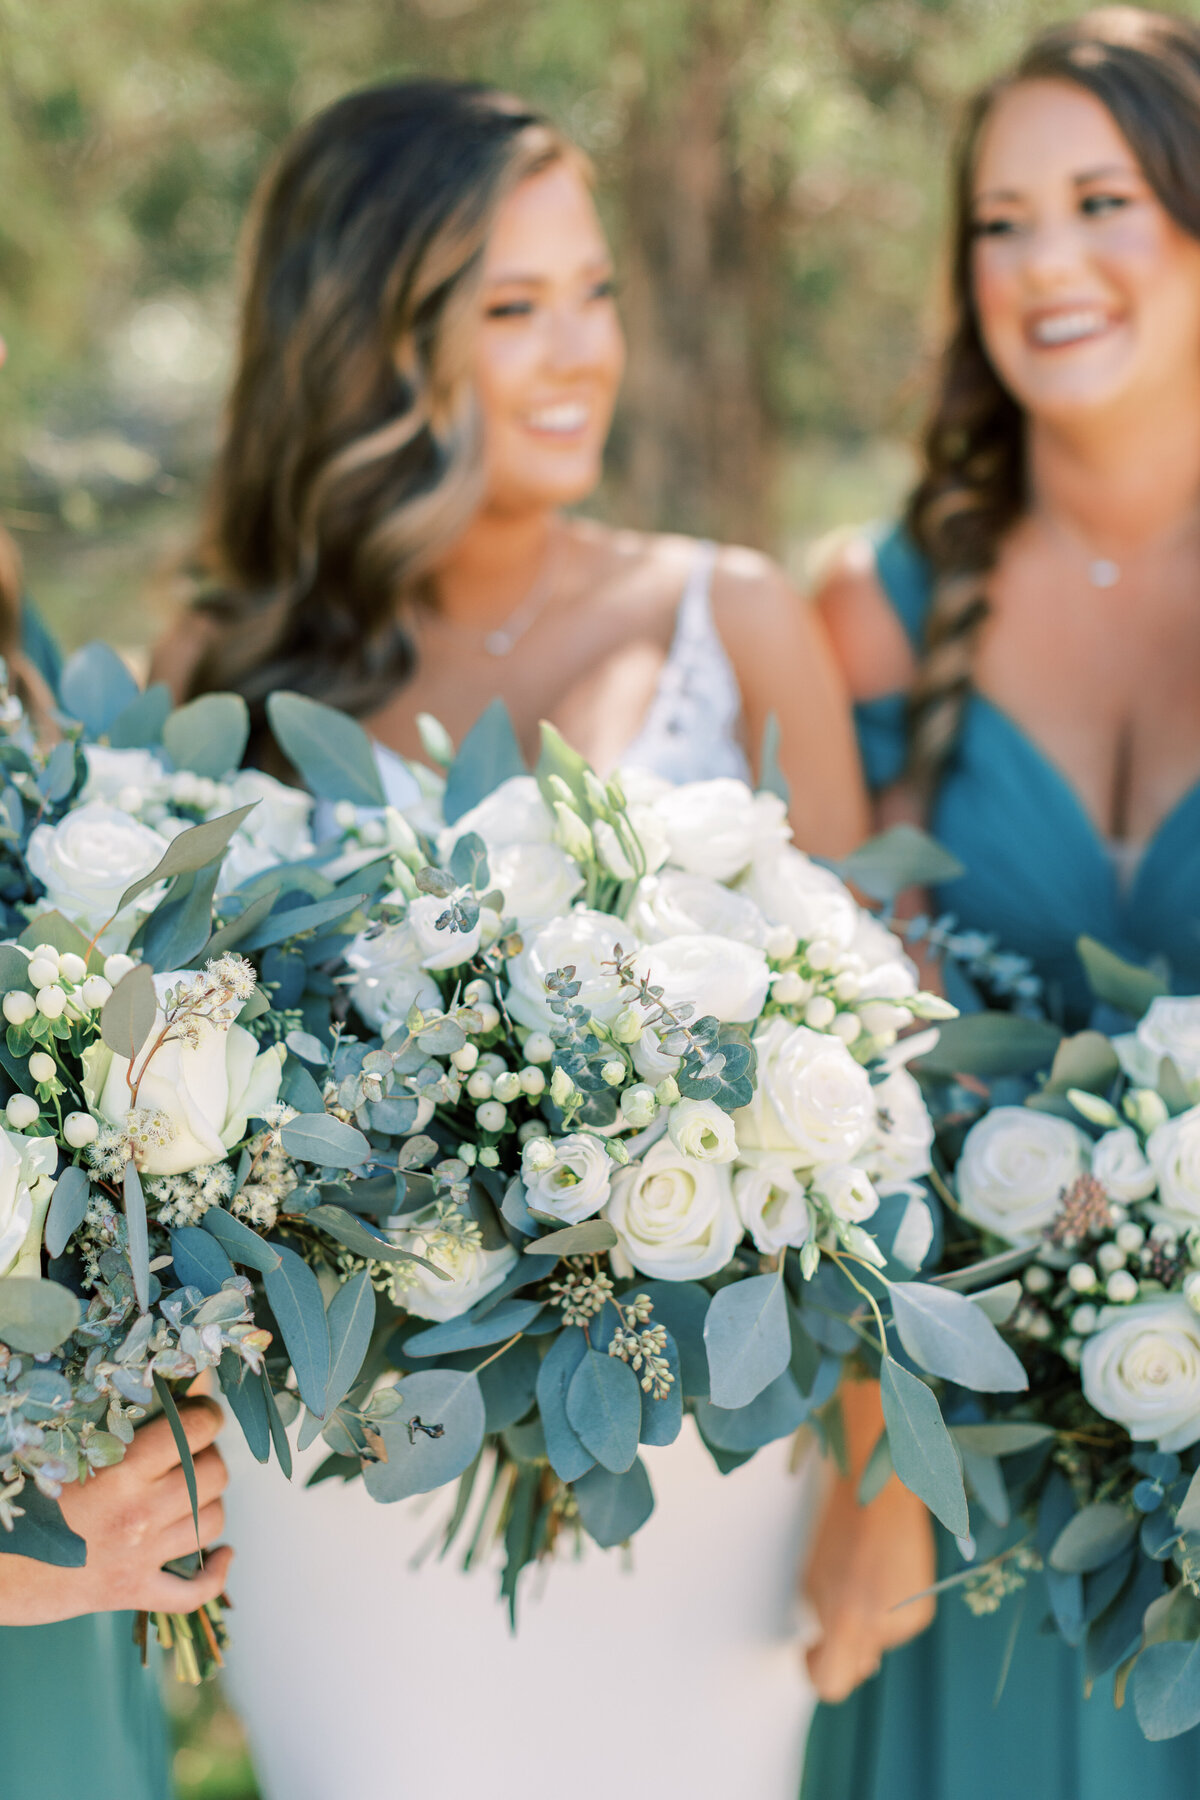 A bride and the bridesmaids hold out their bouquets.